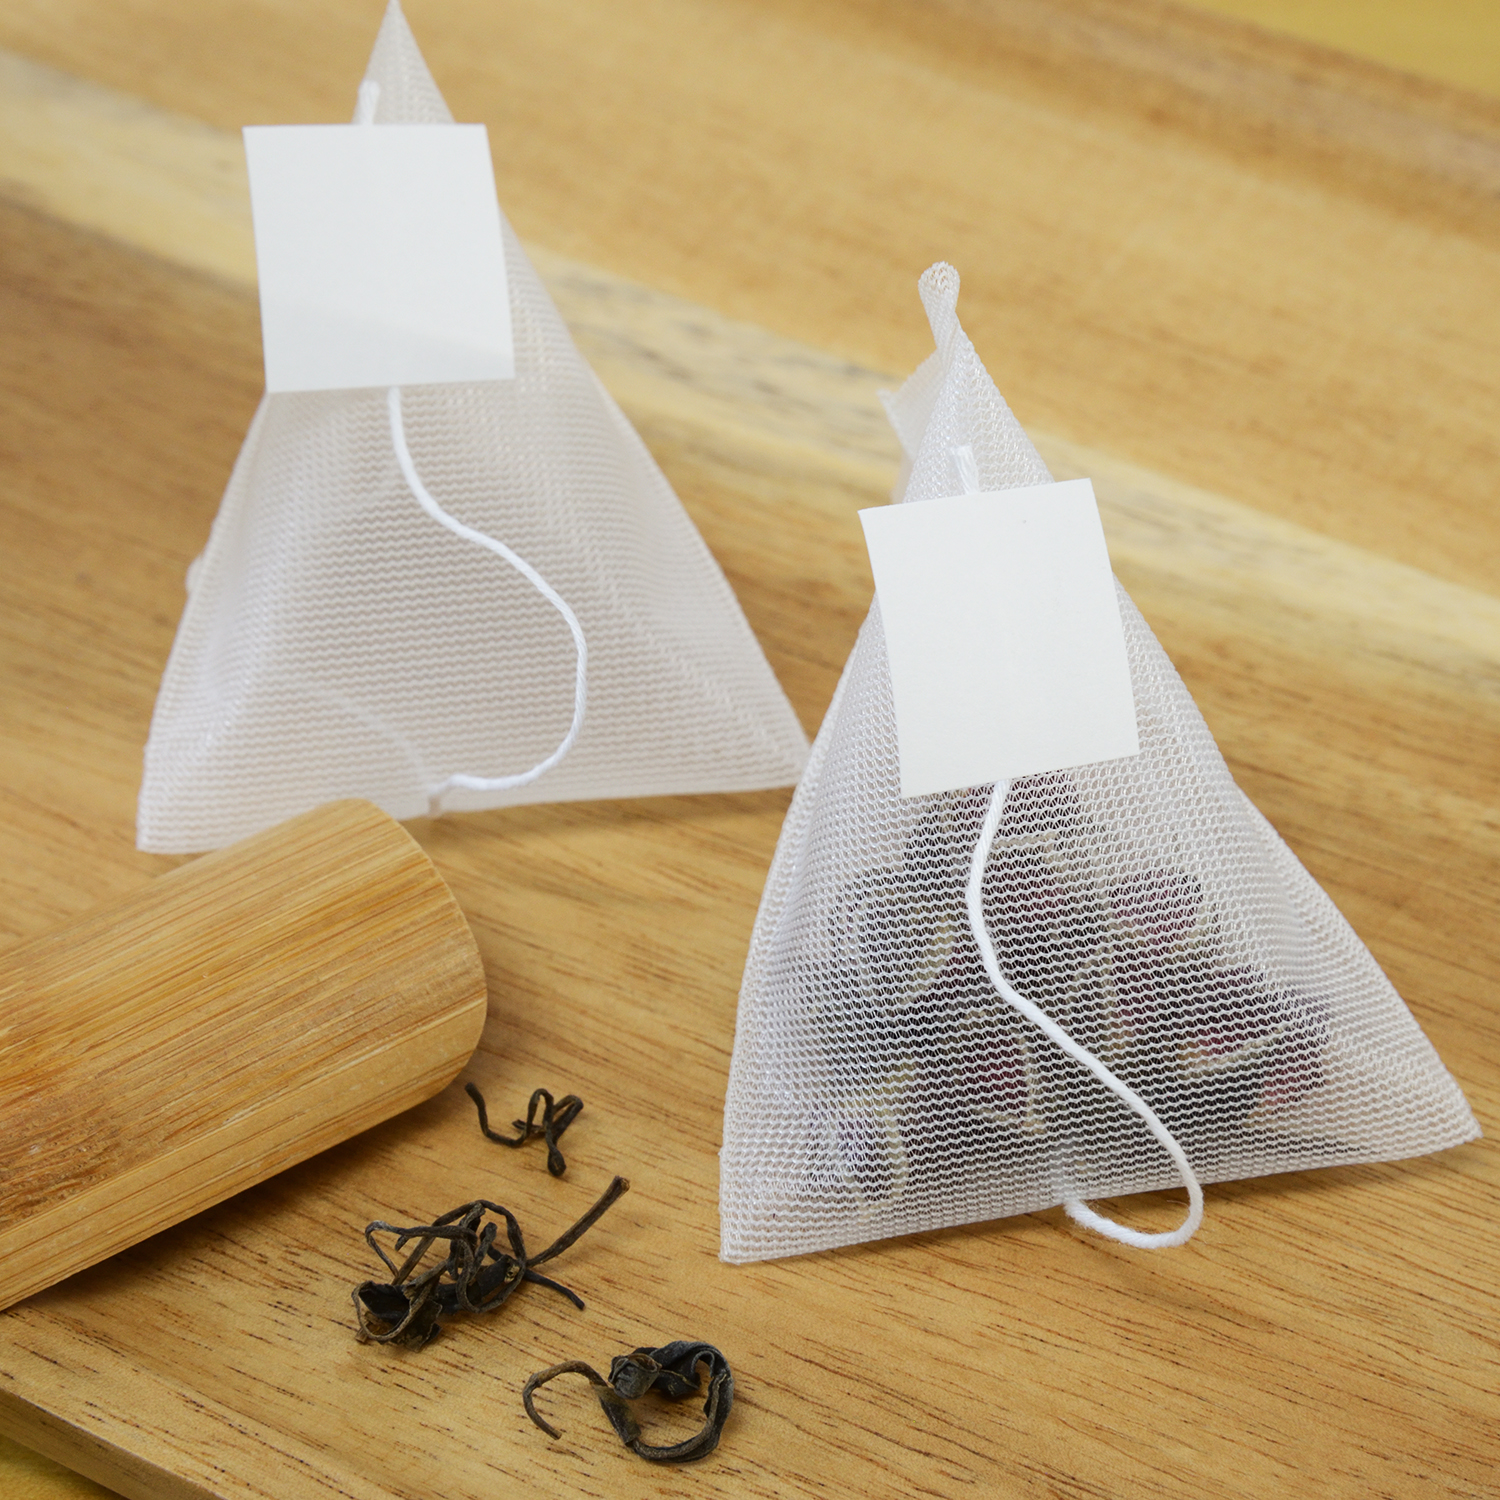 How to Choose High Quality Teabags?